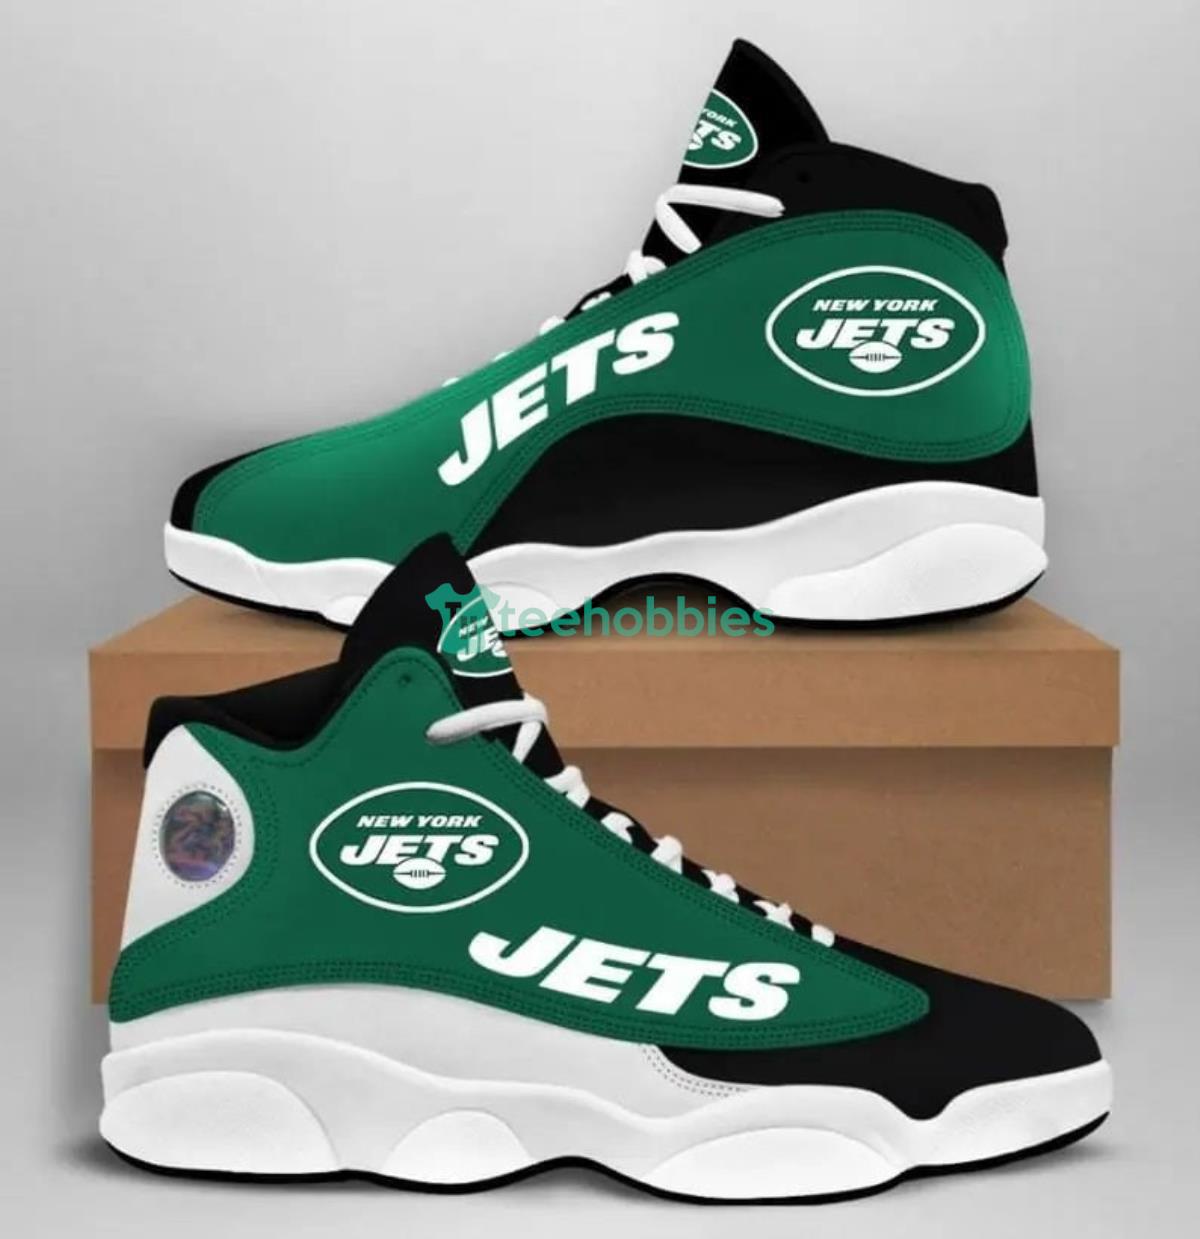 New York Jets Air Jordan 13 Shoes Running Casual Sneakers For Fans Product Photo 1